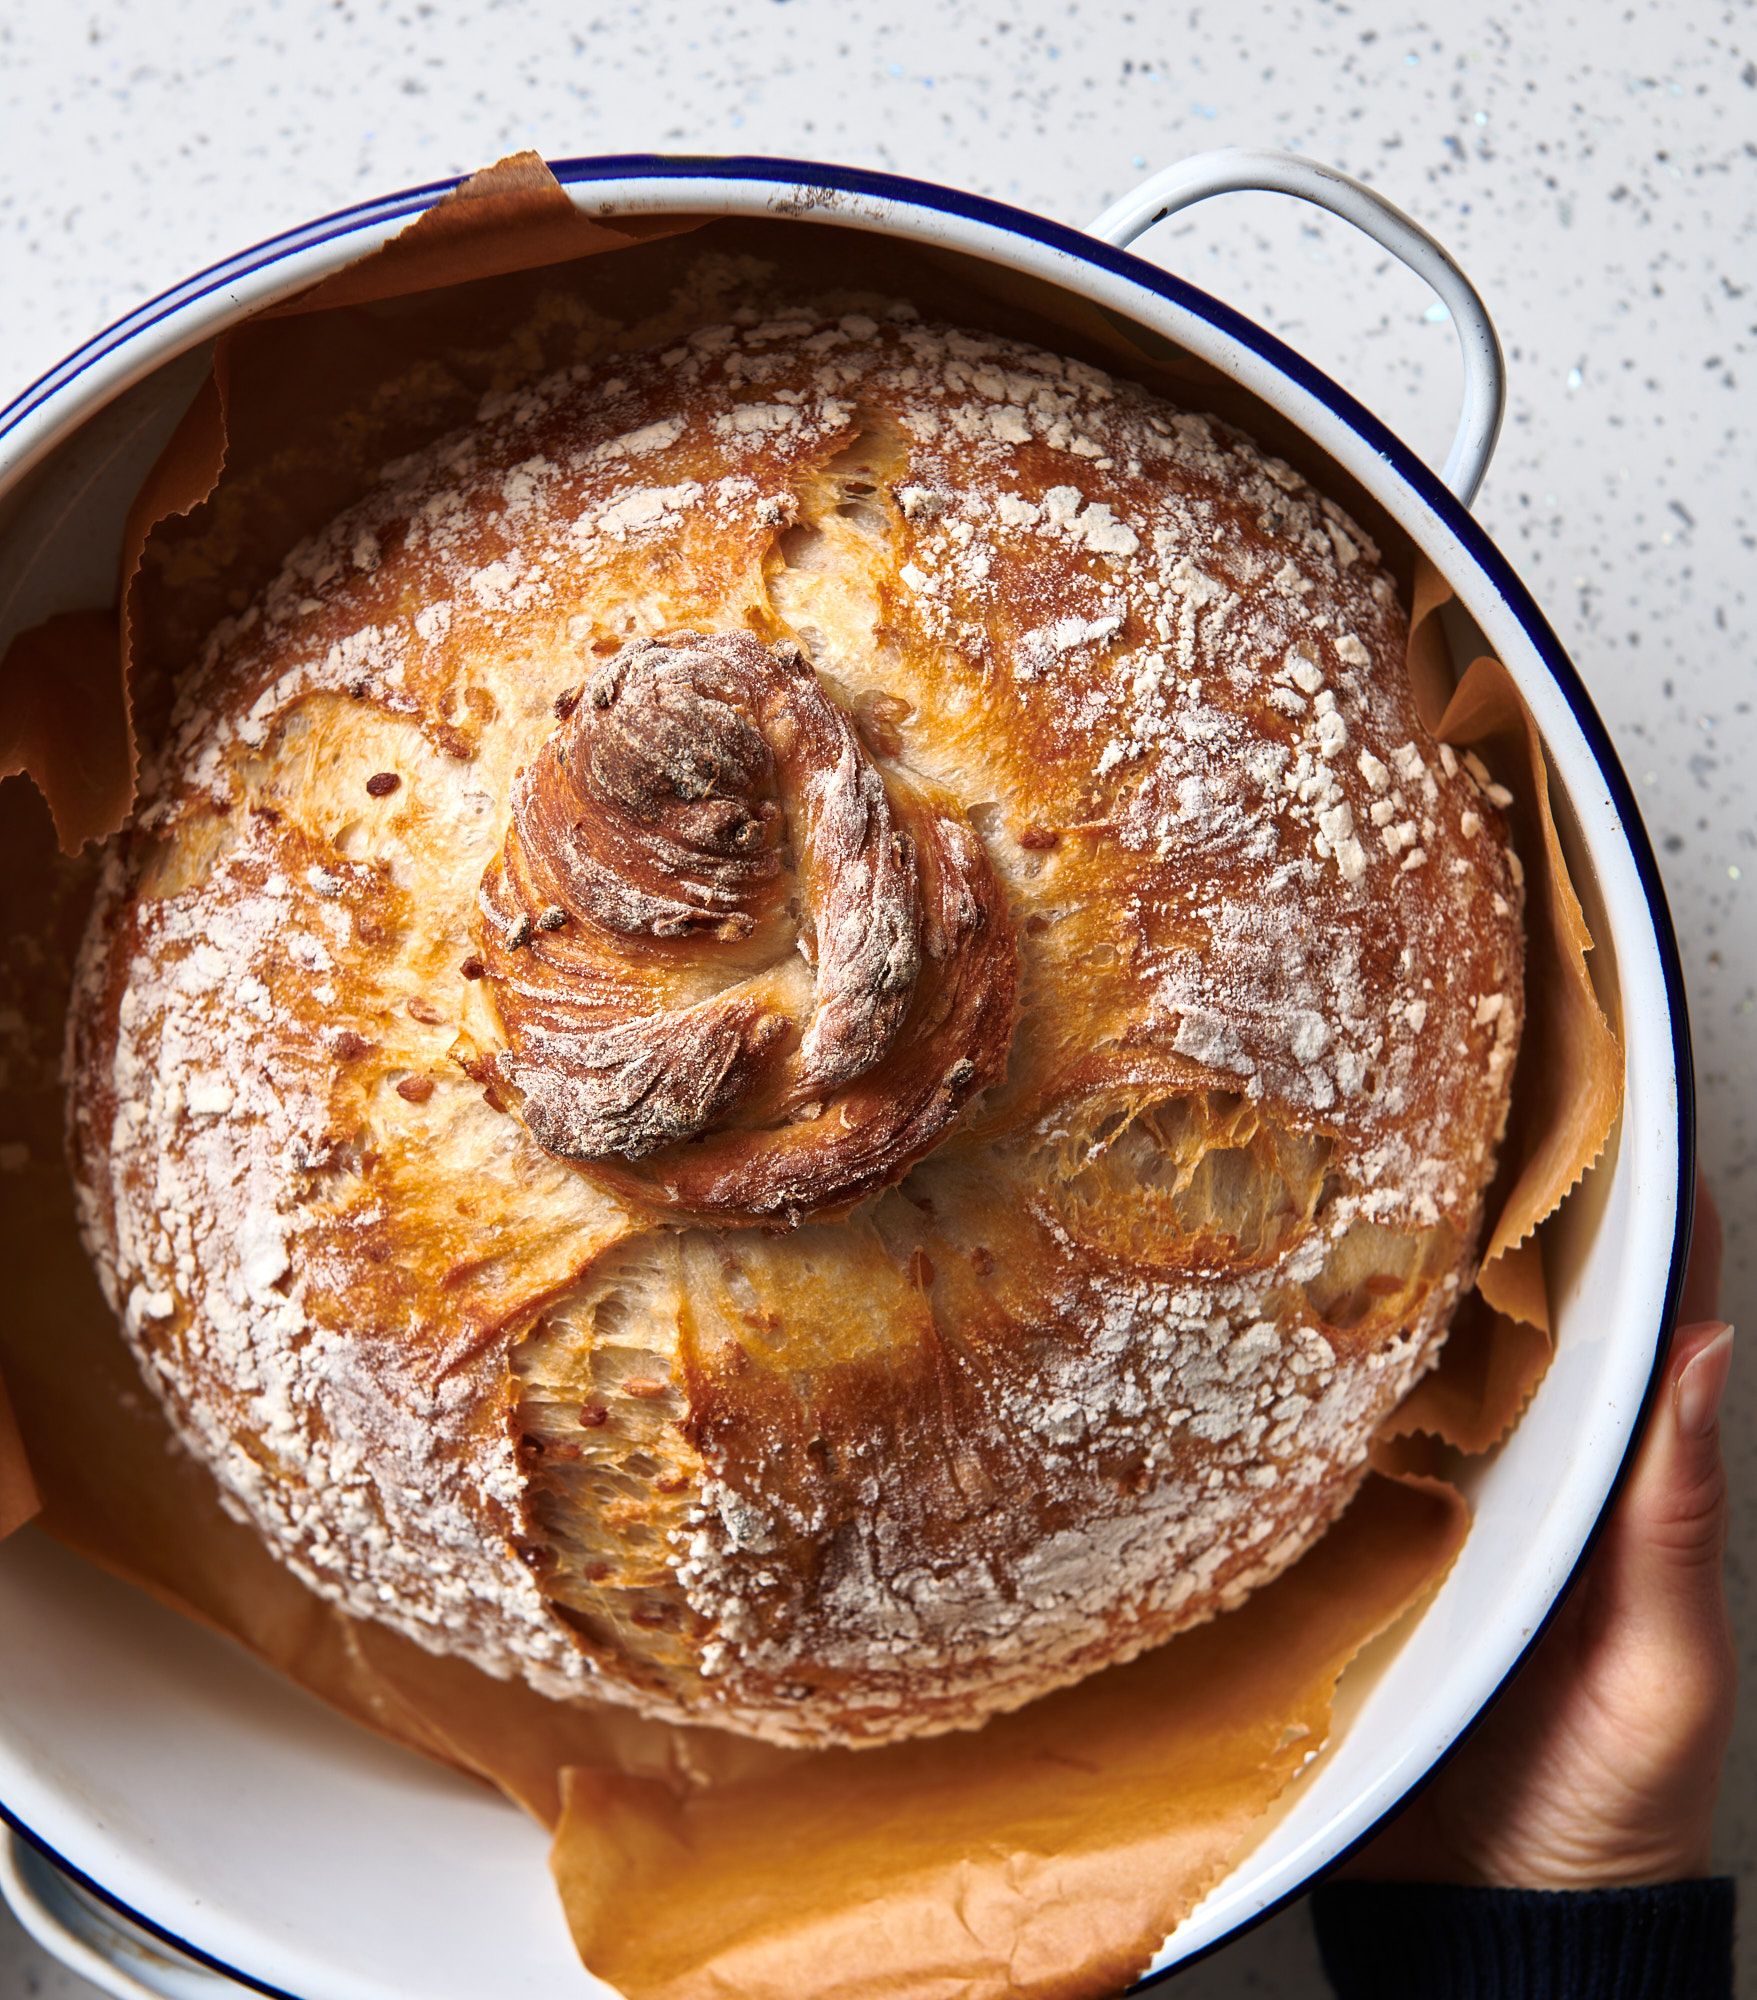 Should You Invest In A Dutch Oven To Bake Sourdough Bread?